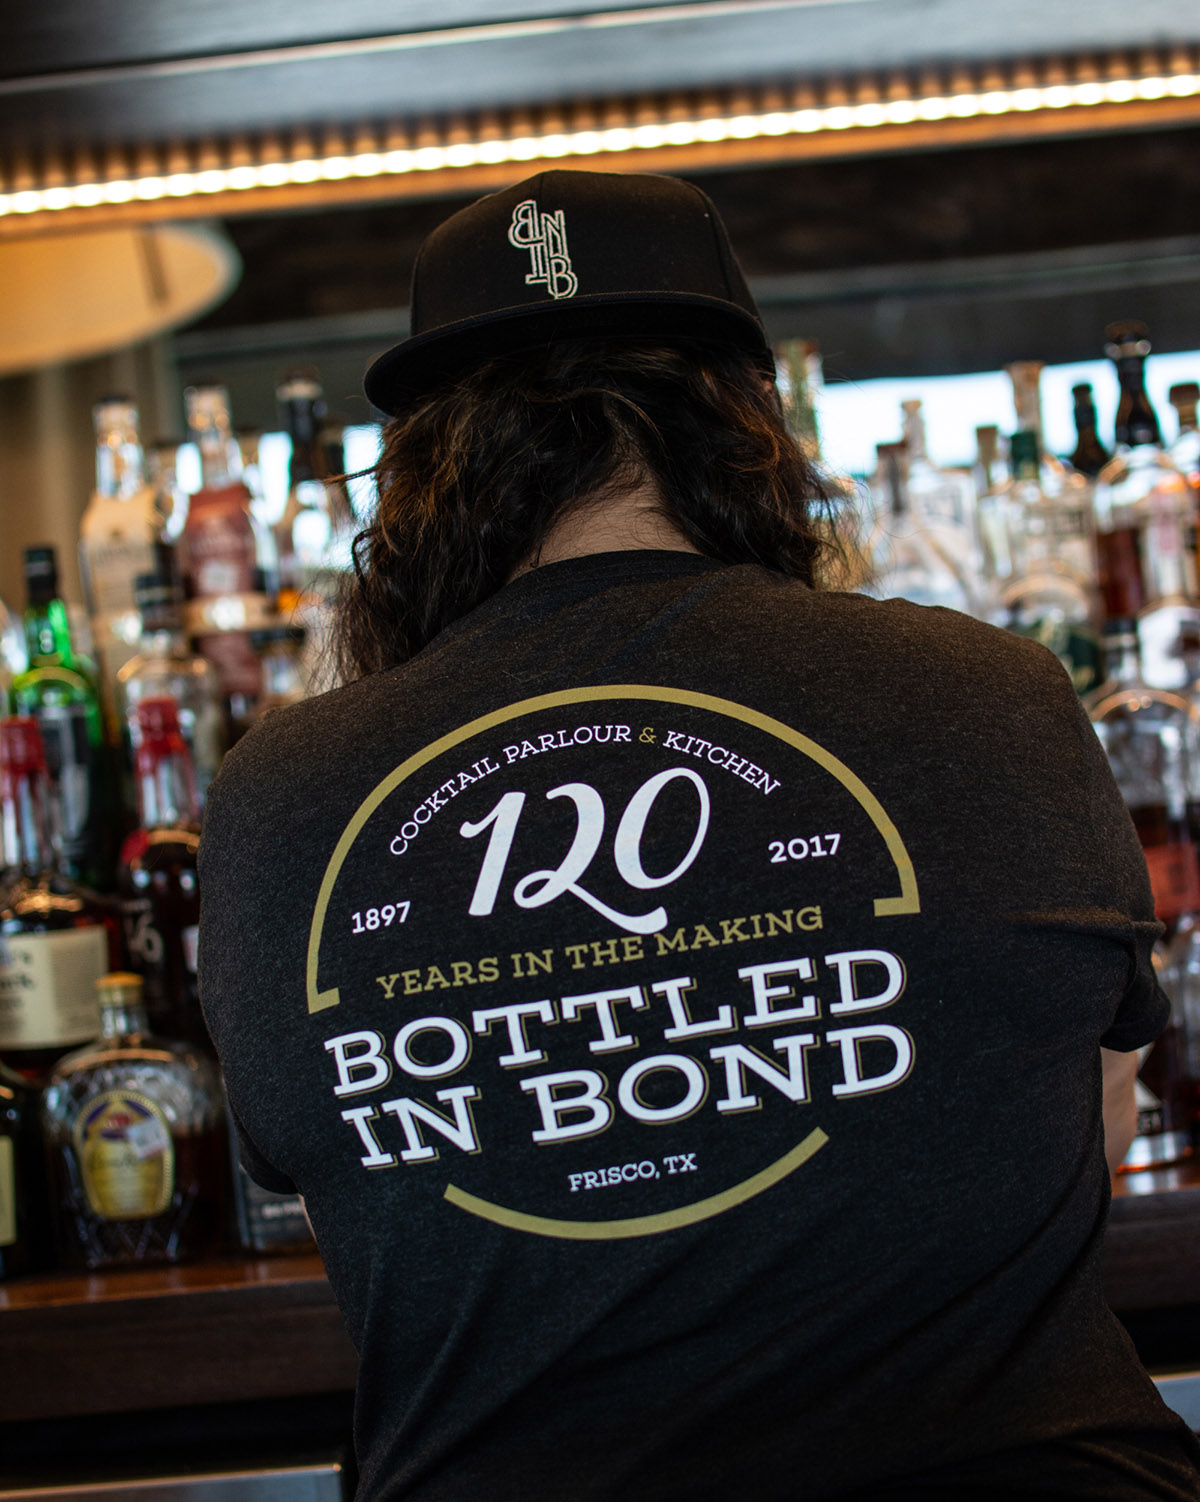 Bottled in Bond Cocktail Parlour and Kitchen 127 Years in the Making T-Shirt